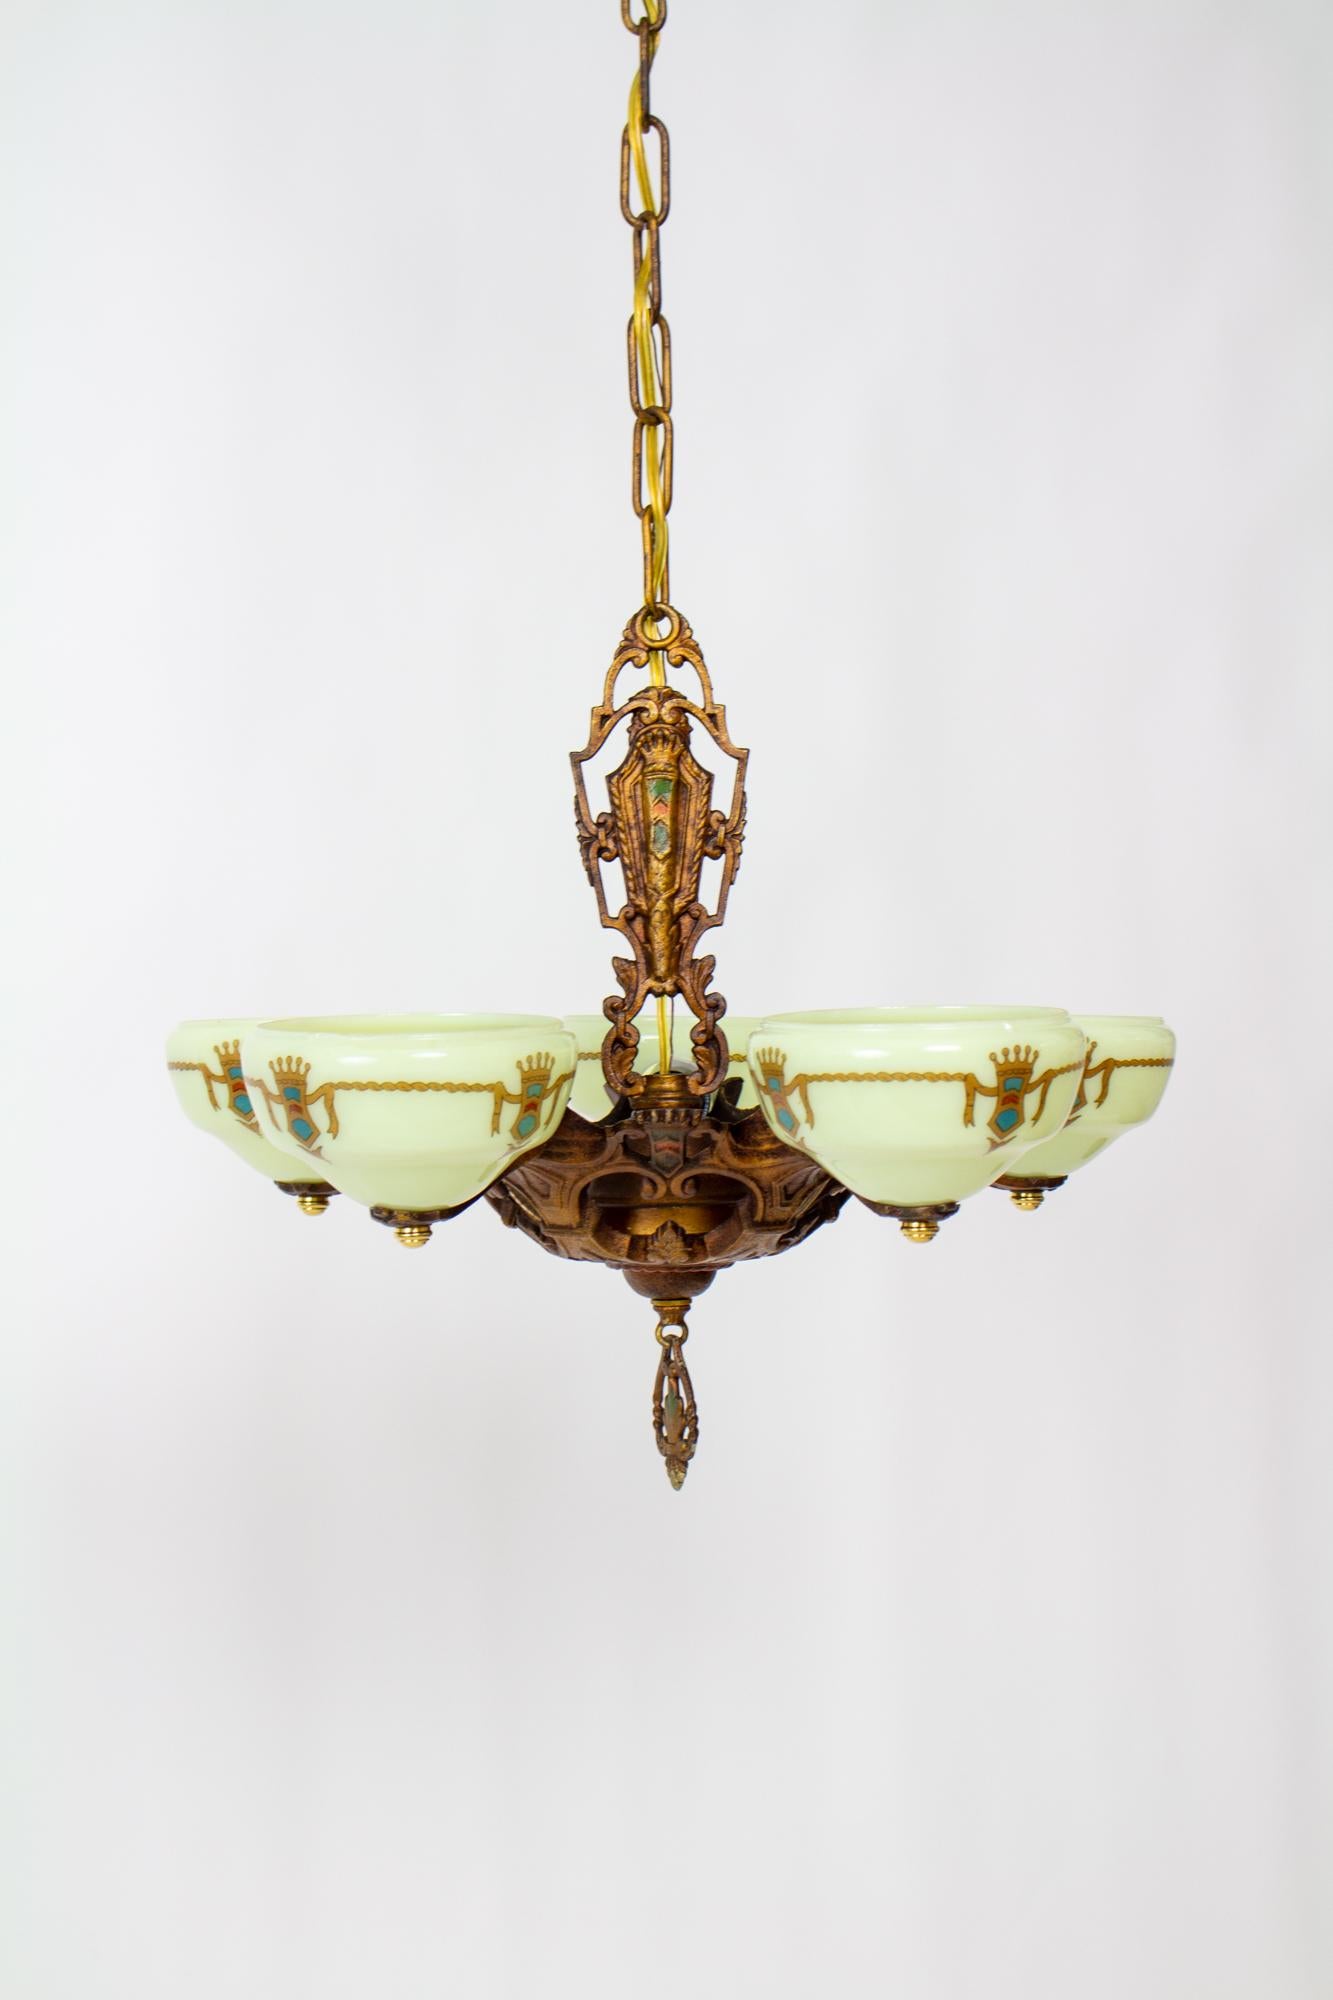 Art Deco gill glass chandelier with five arms and vaseline cup glass shades. Cast Iron frame with original polychrome painted finish. Art Deco / Renaissance Revival style. Glass shades are a unique bolted on cup style. Shades are Vaseline glass and